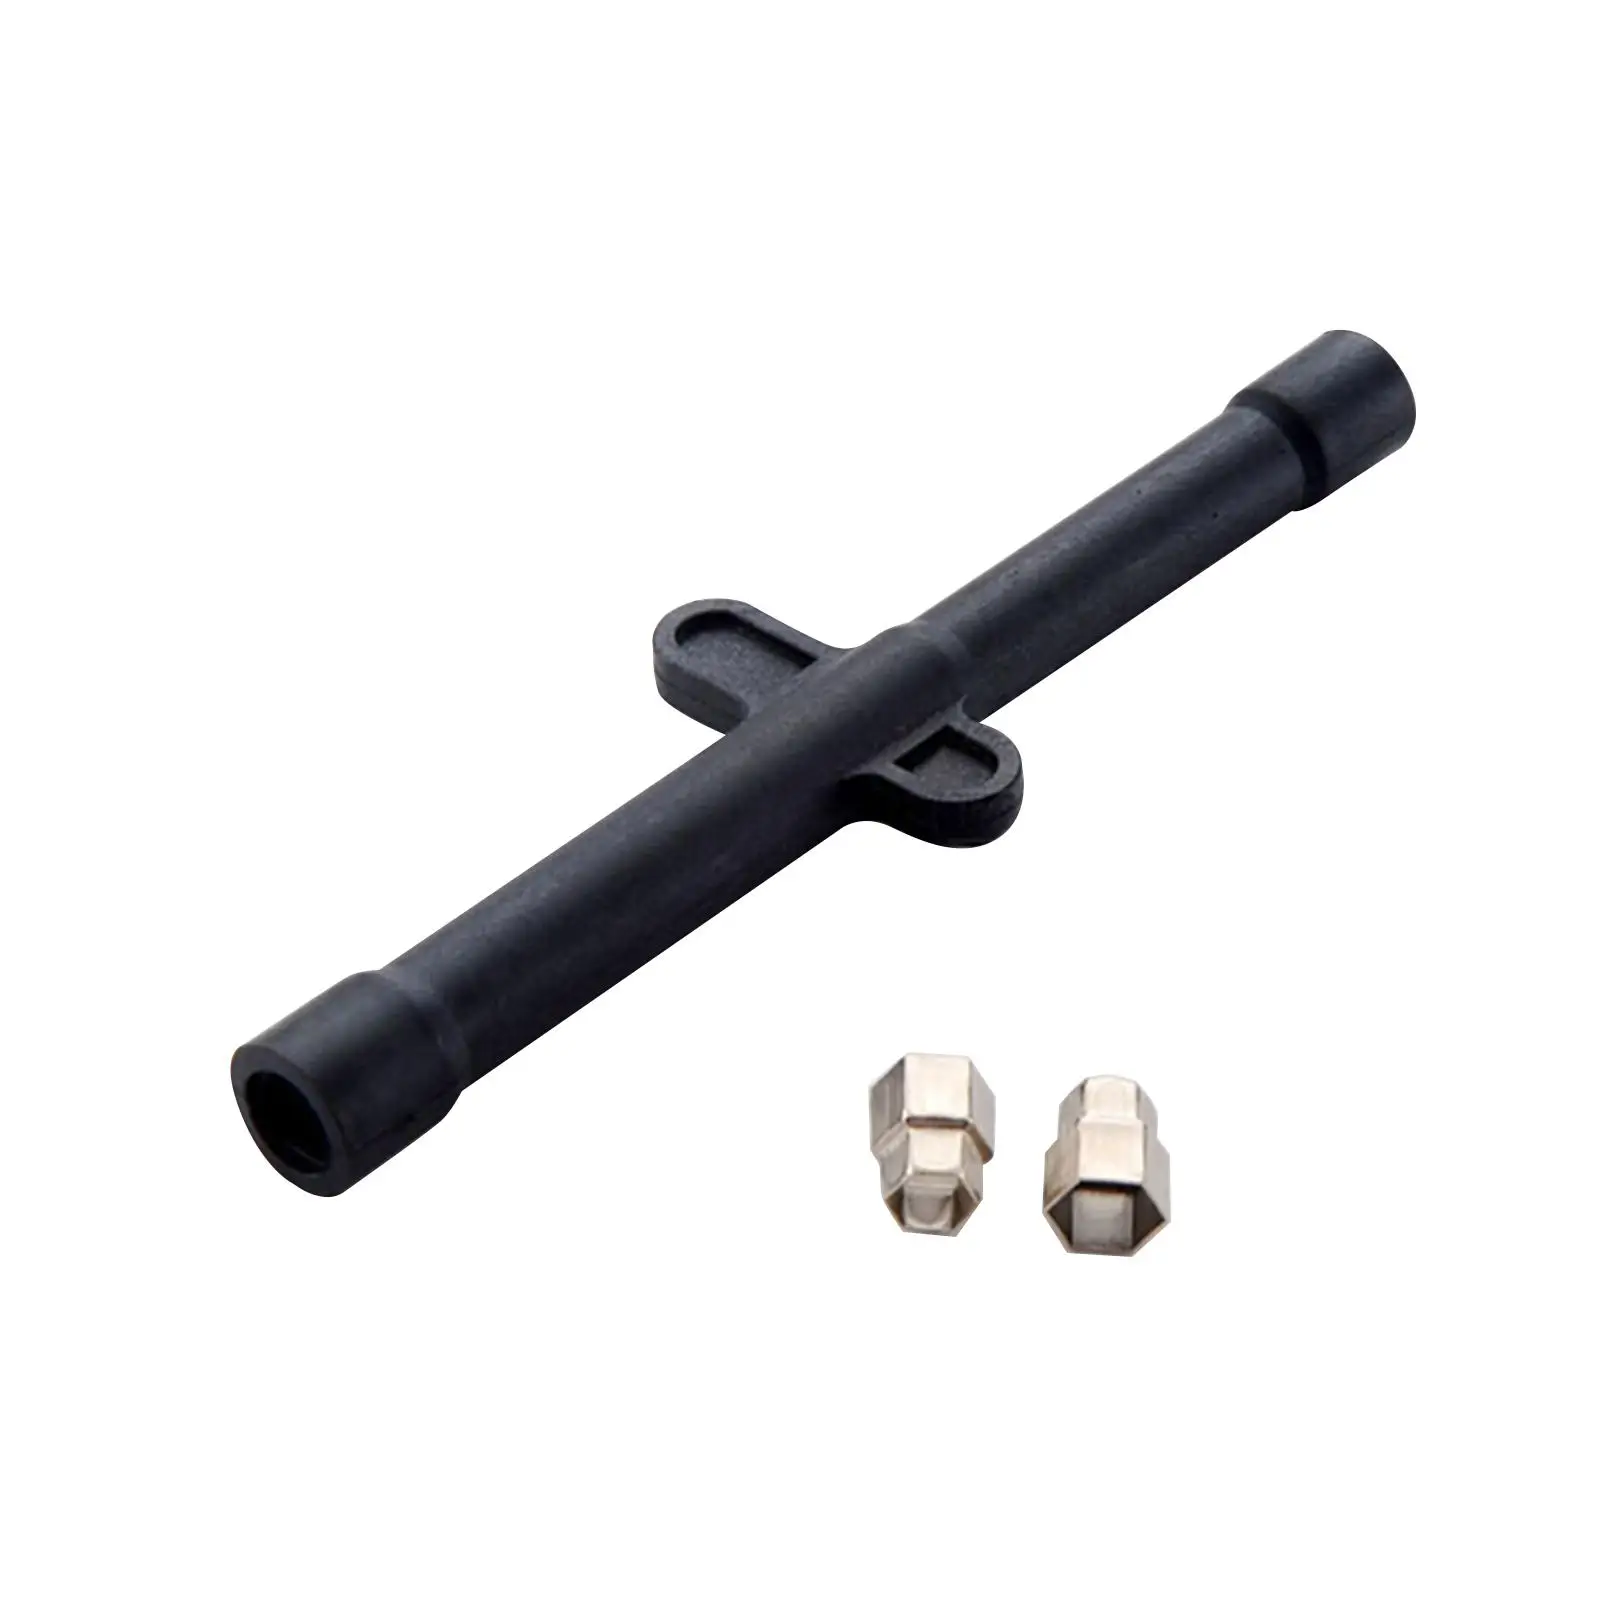 Socket Wrench Faucet Accessories Installation Rod 9 10 11 12mm Mounting Parts Double End Remove Tool for Home Repair